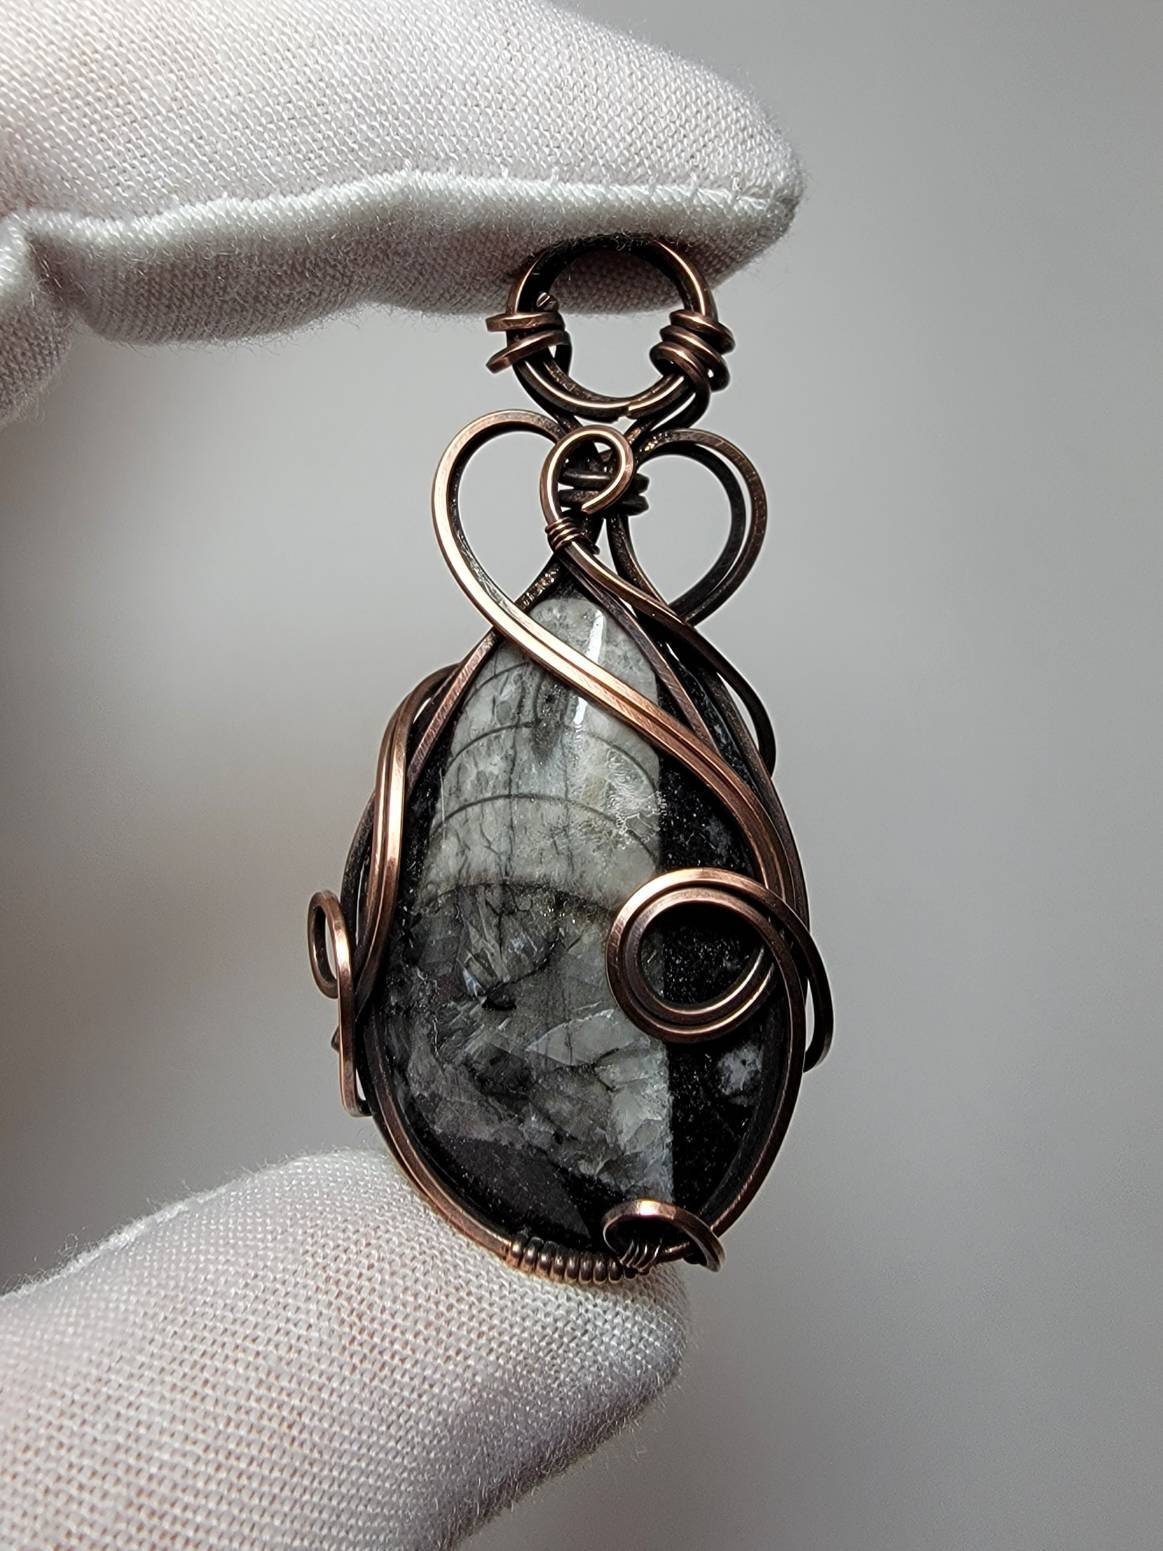 Orthoceras Fossil Cabachon 'Tyet' Pendant Wire Wrap Oxidized Copper